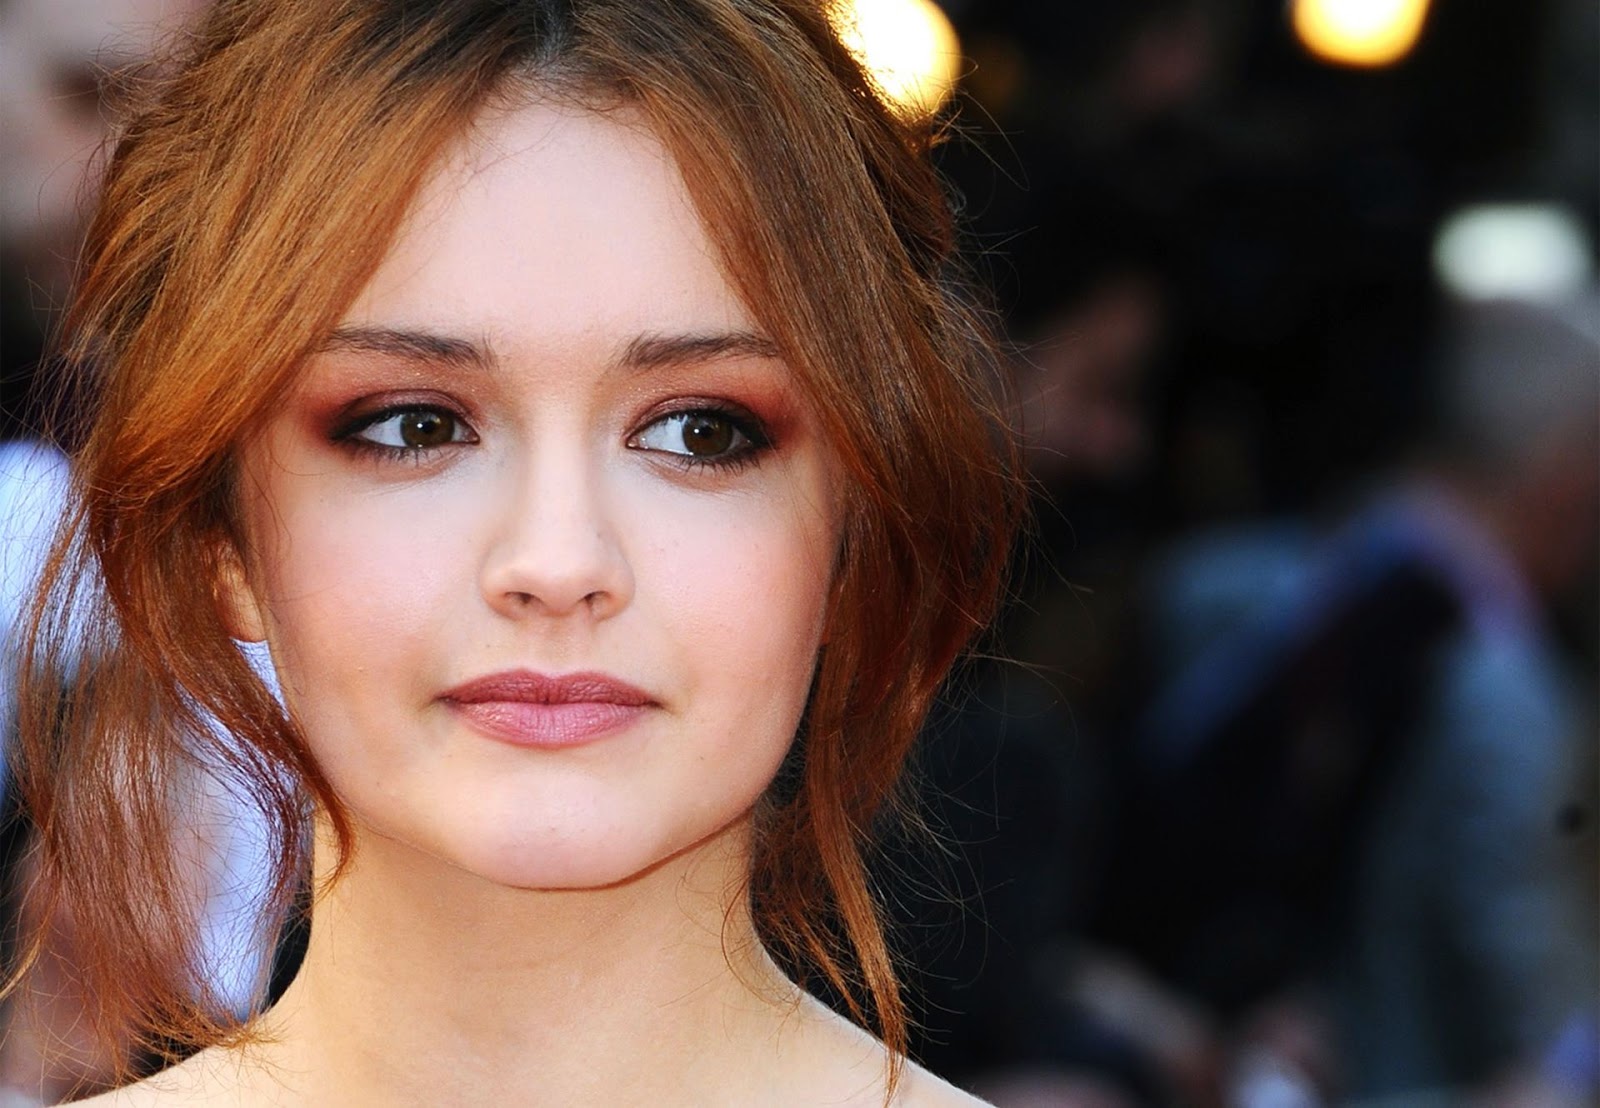 List of Actress Olivia Cooke new upcoming Hollywood movies in 2016, 2017 Calendar on Upcoming Wiki. Updated list of movies 2016-2017. Info about films released in wiki, imdb, wikipedia.